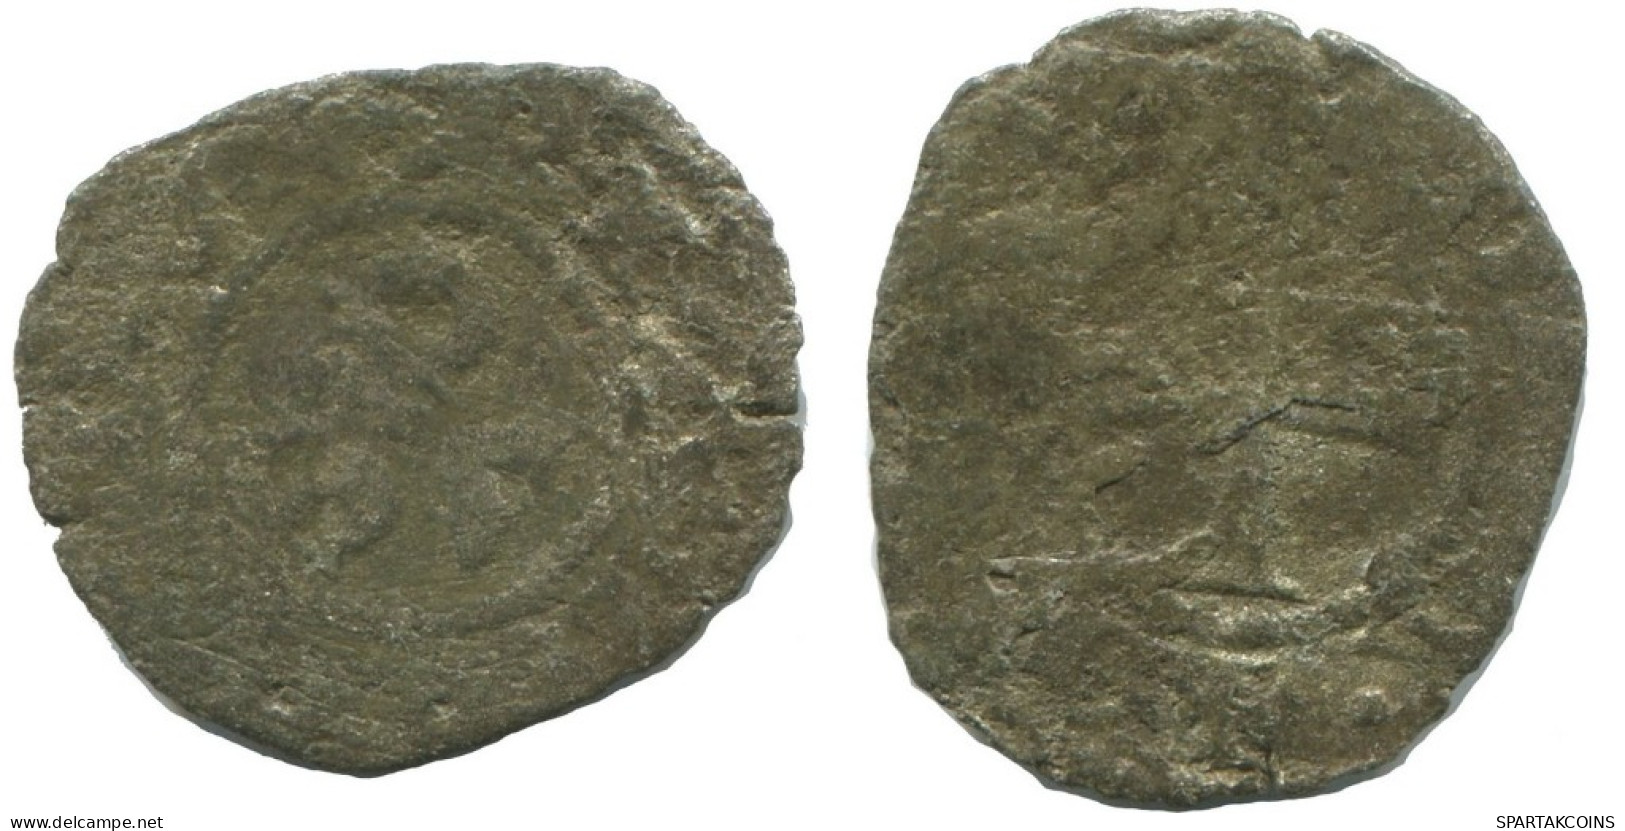 Authentic Original MEDIEVAL EUROPEAN Coin 0.6g/16mm #AC216.8.F.A - Other - Europe